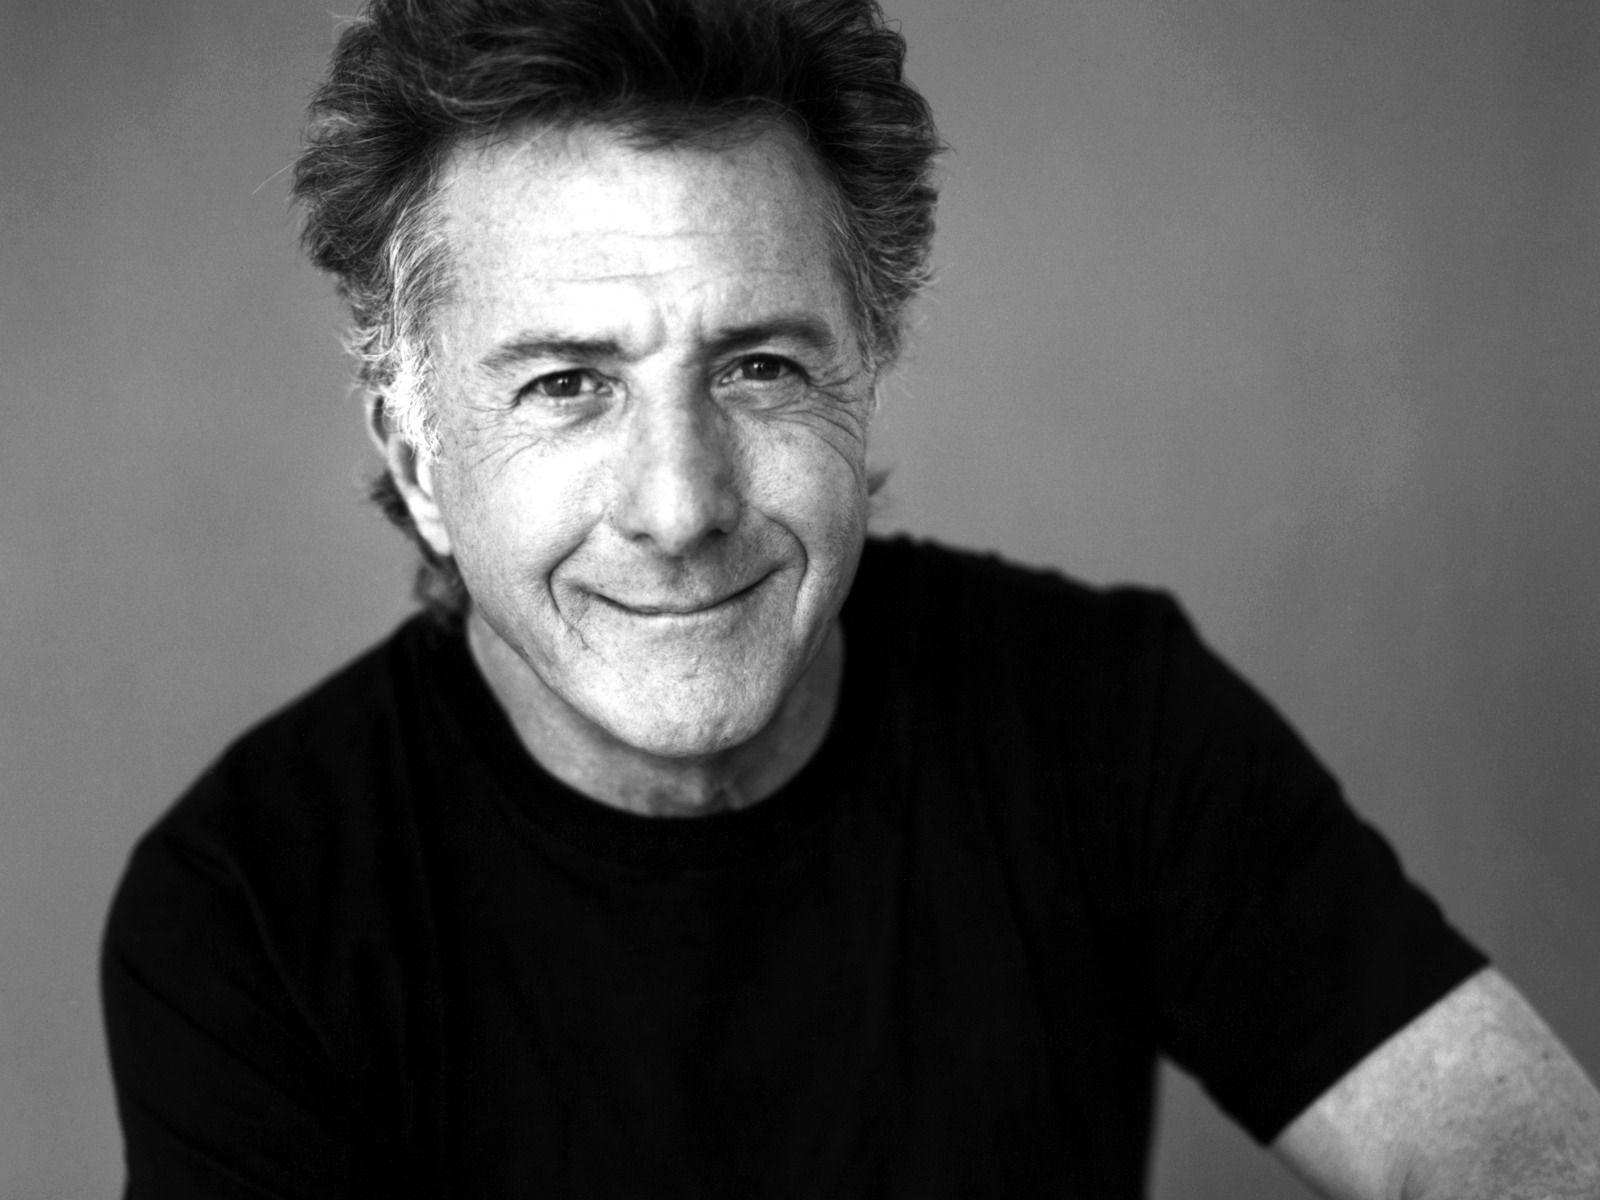 Wallpaper for Dustin Hoffman ⇒ Resolution 1600x1200px